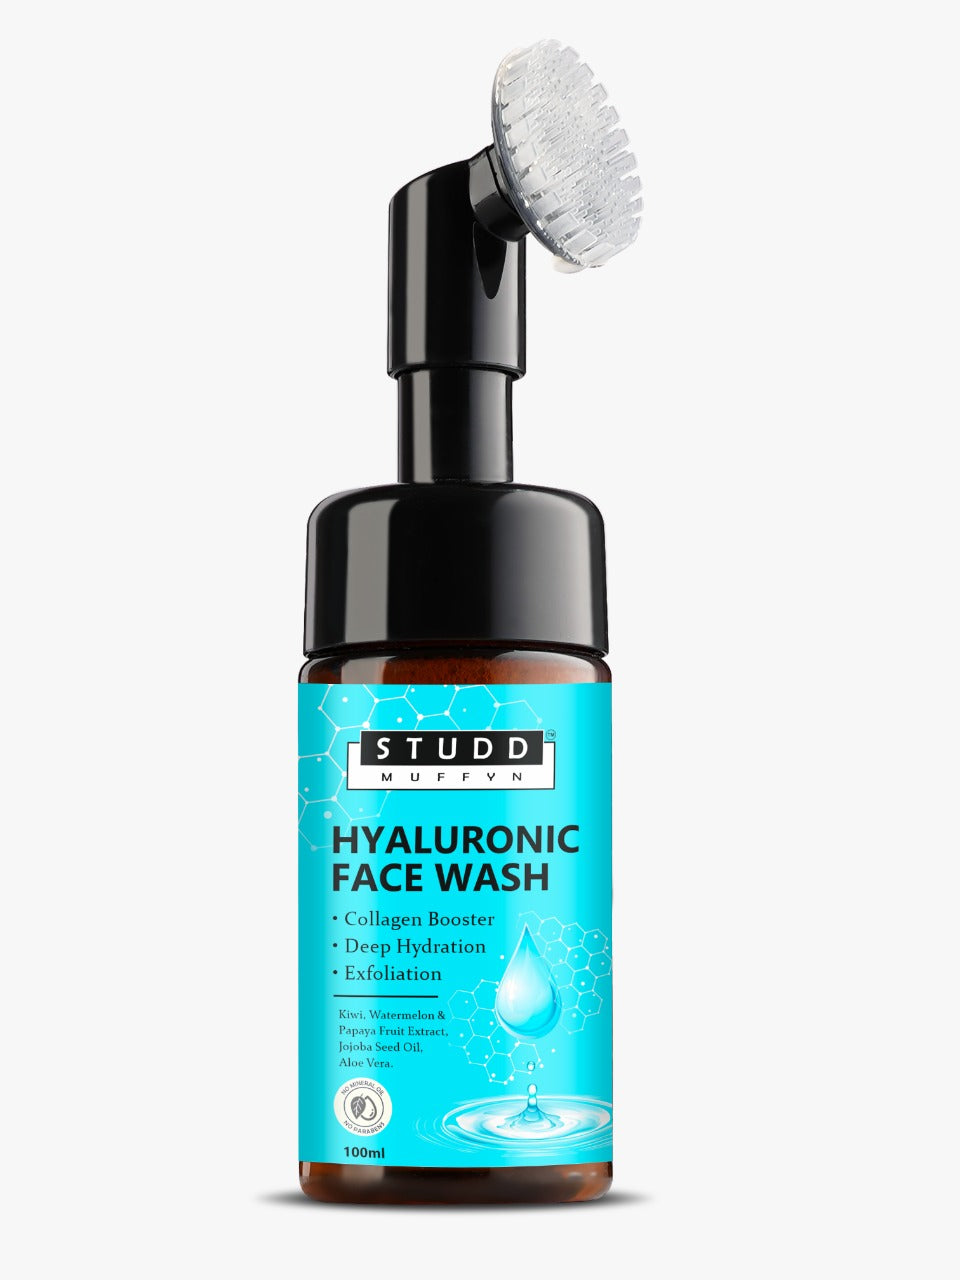 Hyaluronic Face Wash